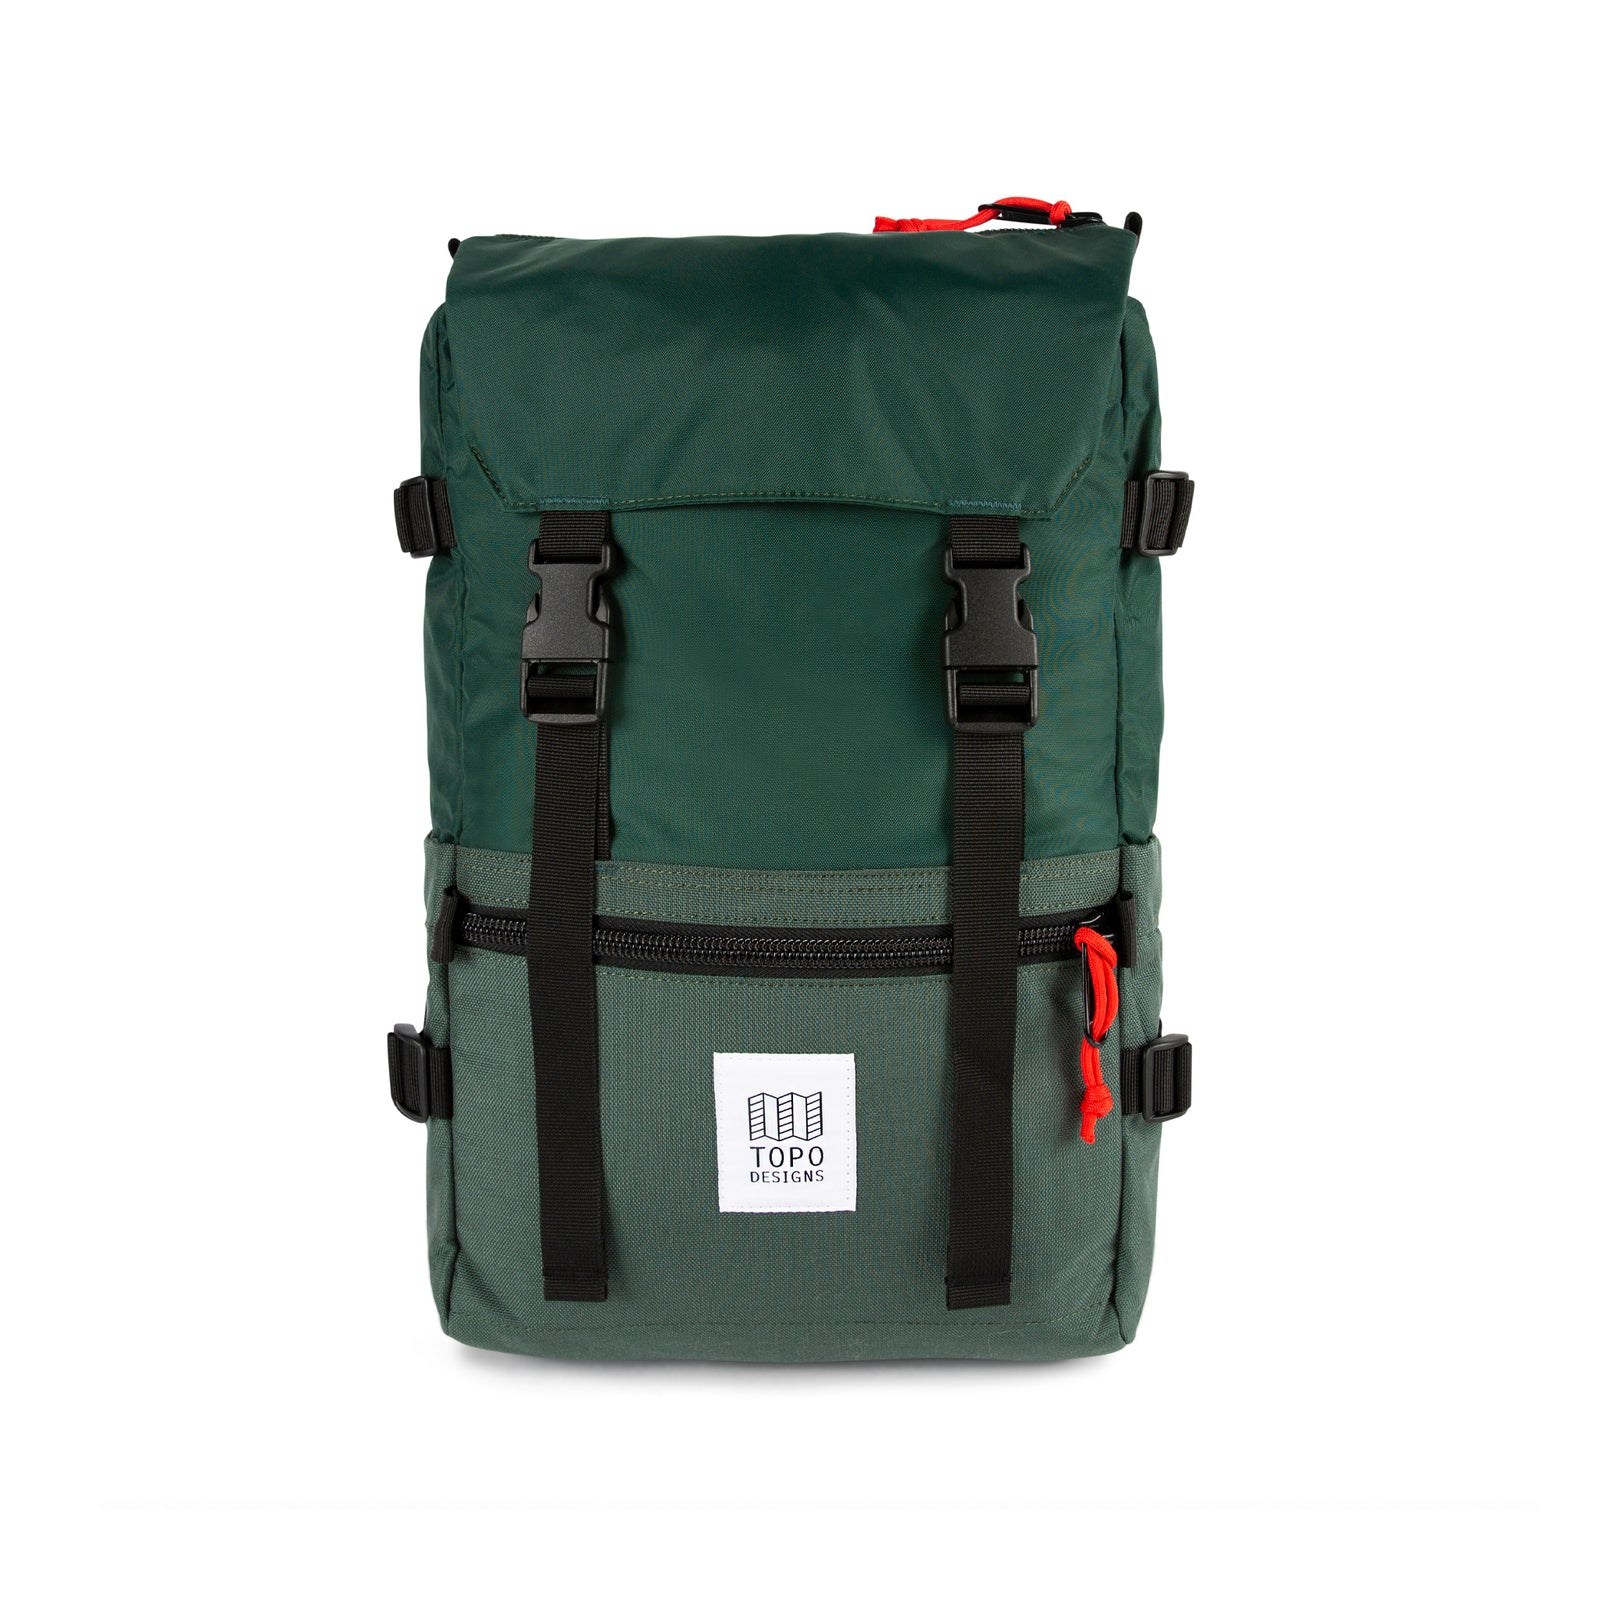 Topo Designs Rover Pack Classic laptop backpack in "Forest" green.